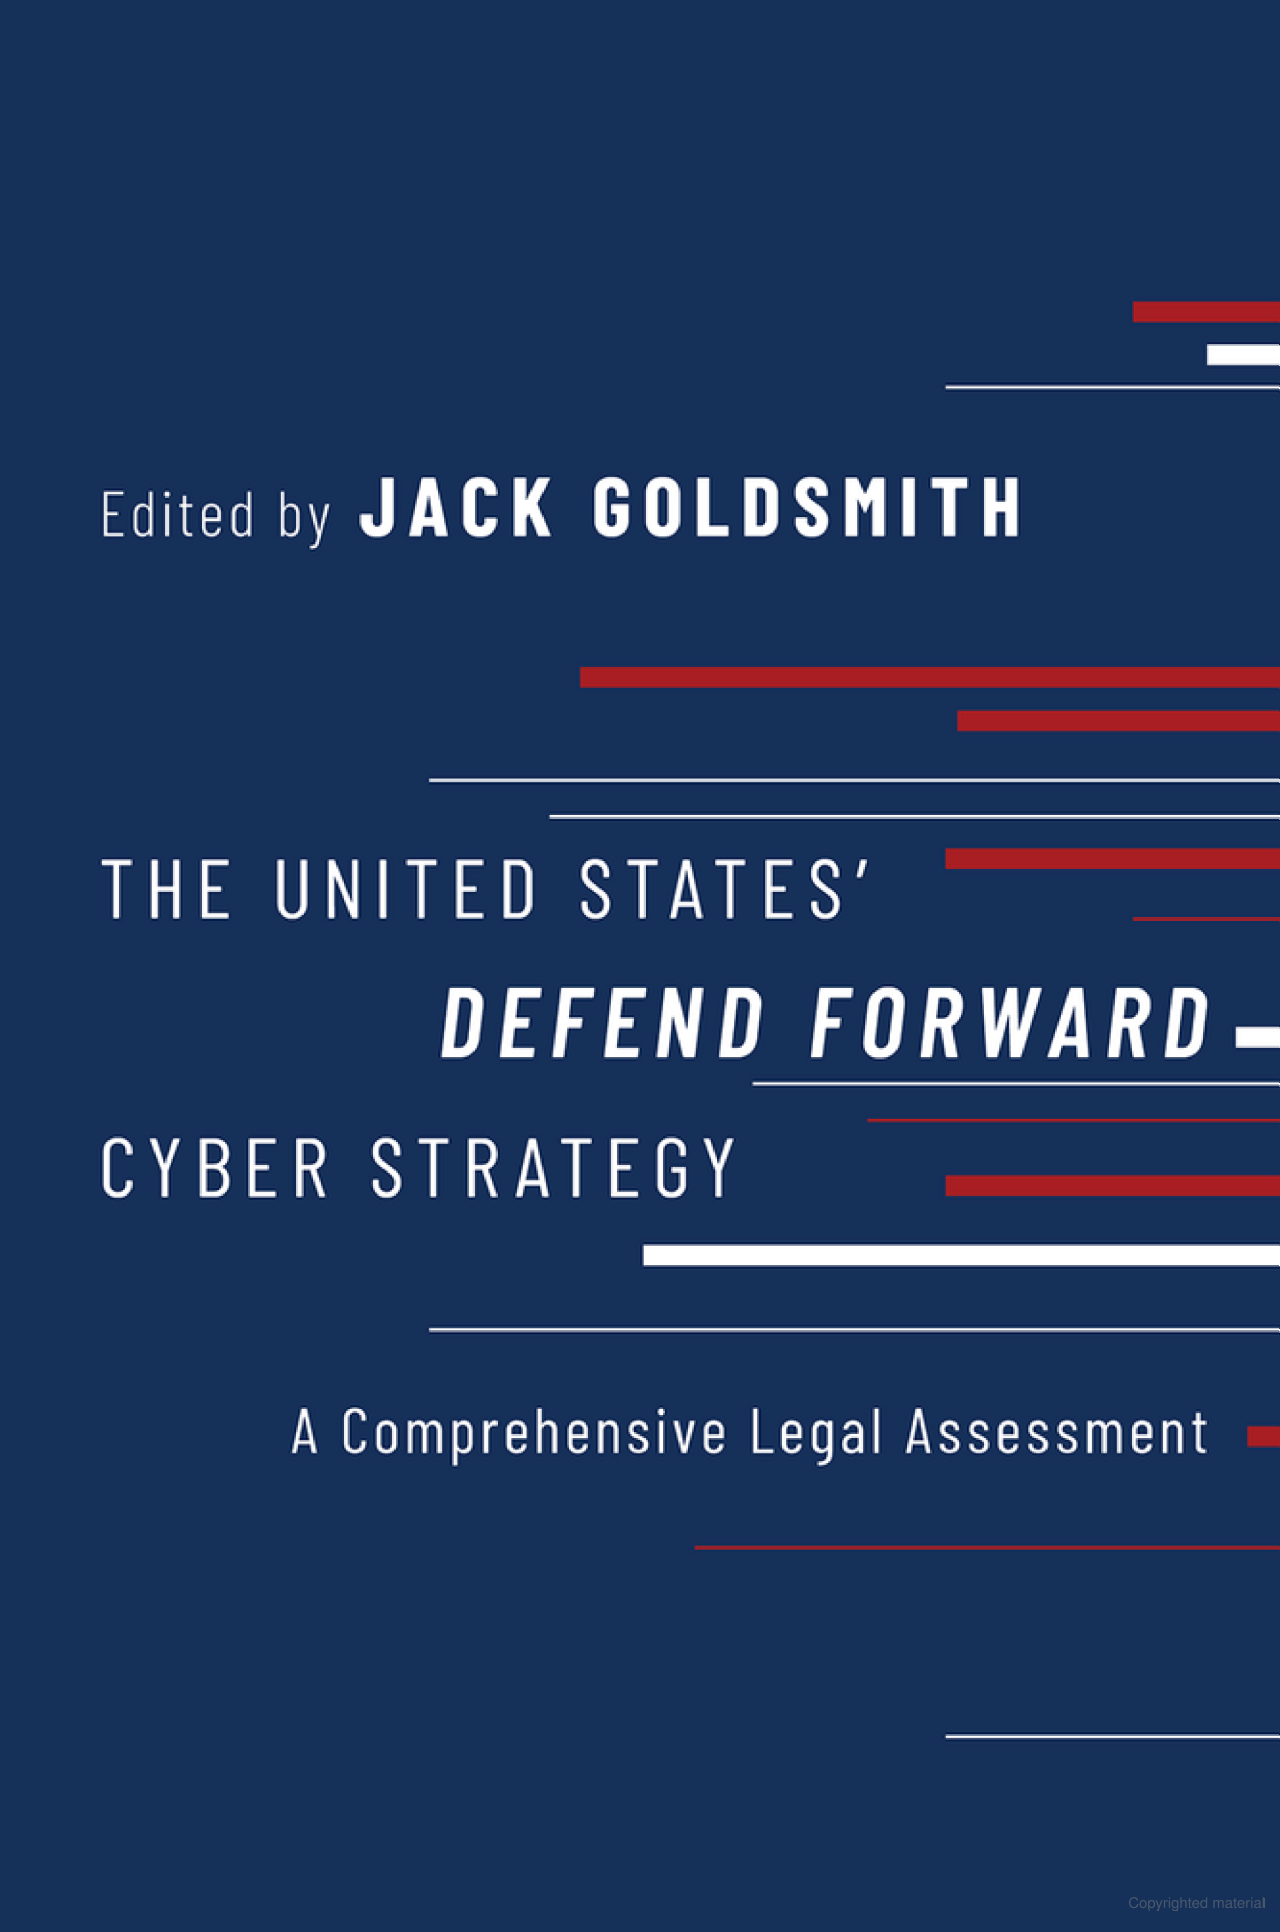 Image for The United States' Defend Forward Cyber Strategy: A Comprehensive Legal Assessment